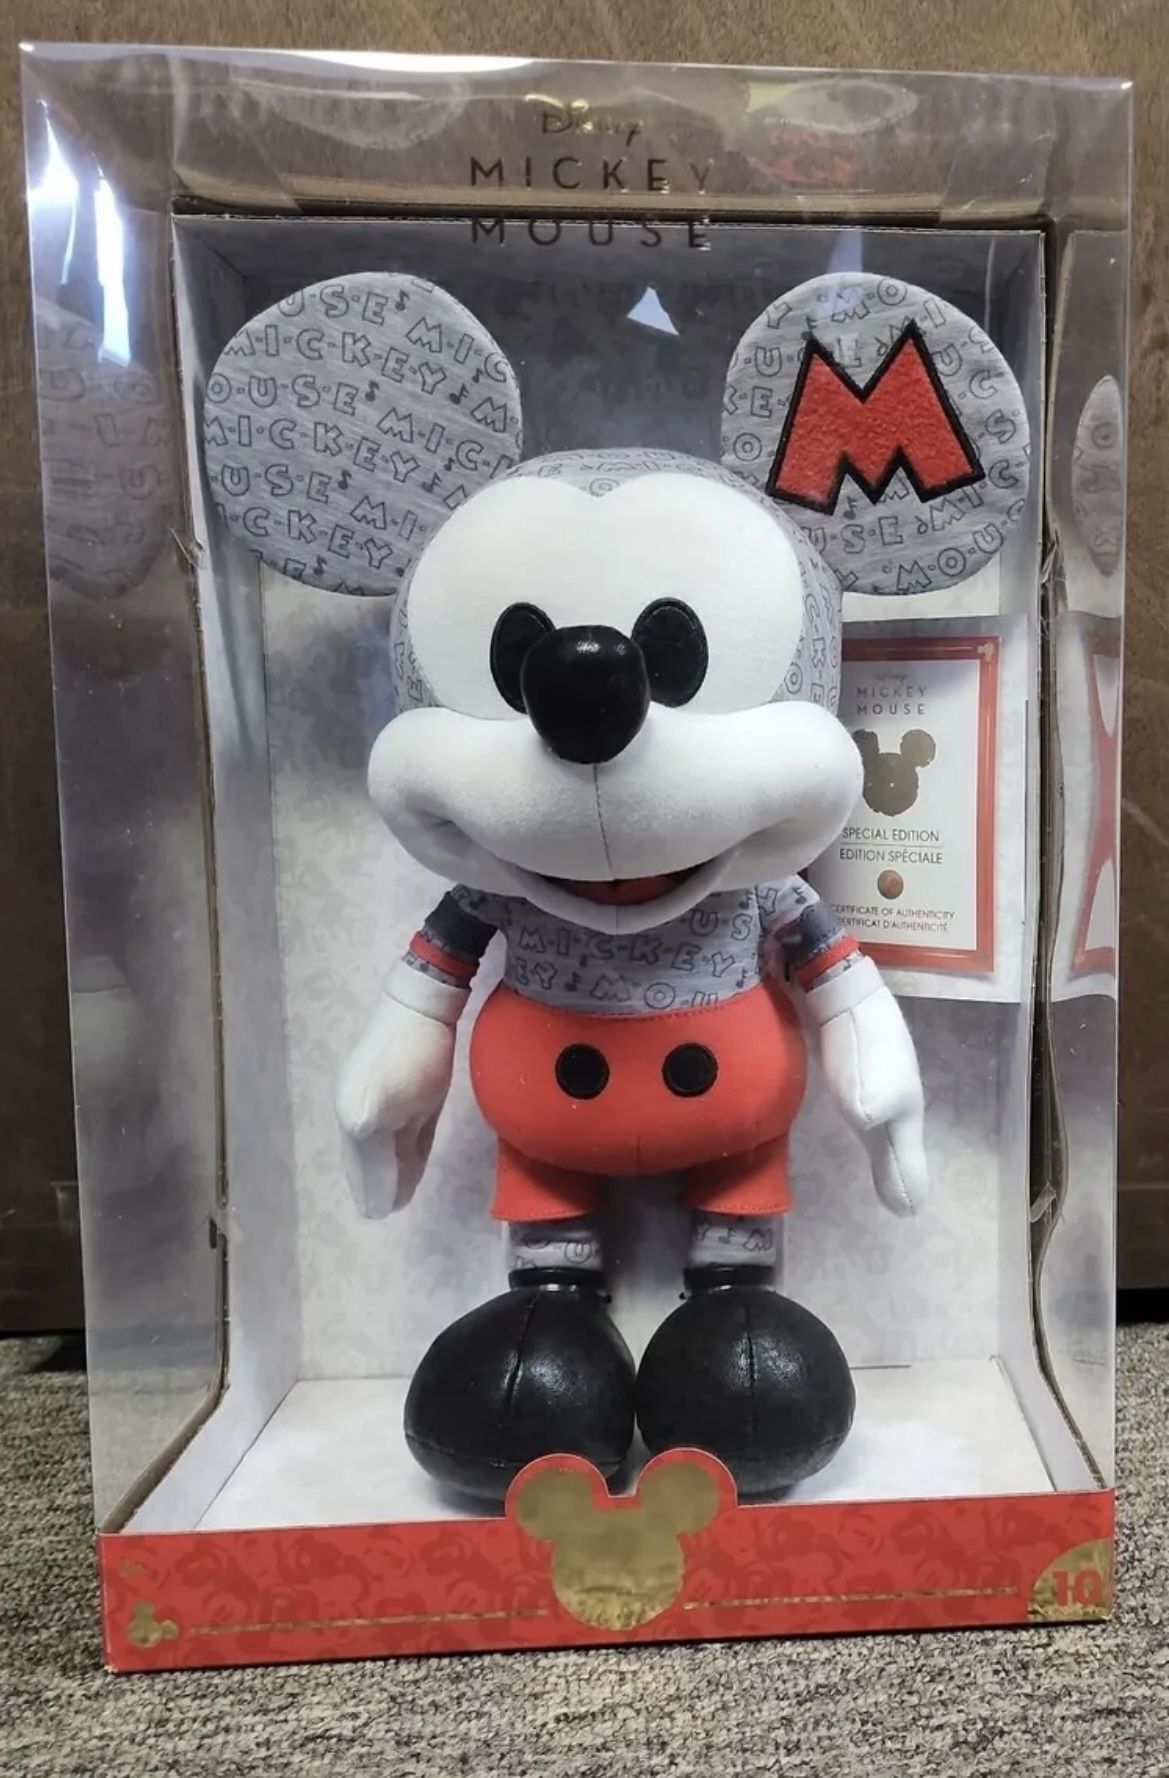 Mouseketeer Mickey Mouse 16” Plush *BRAND NEW MINT* Amazon Exclusive Disney’s Year of the Mouse October Collector 50s Mouse Club